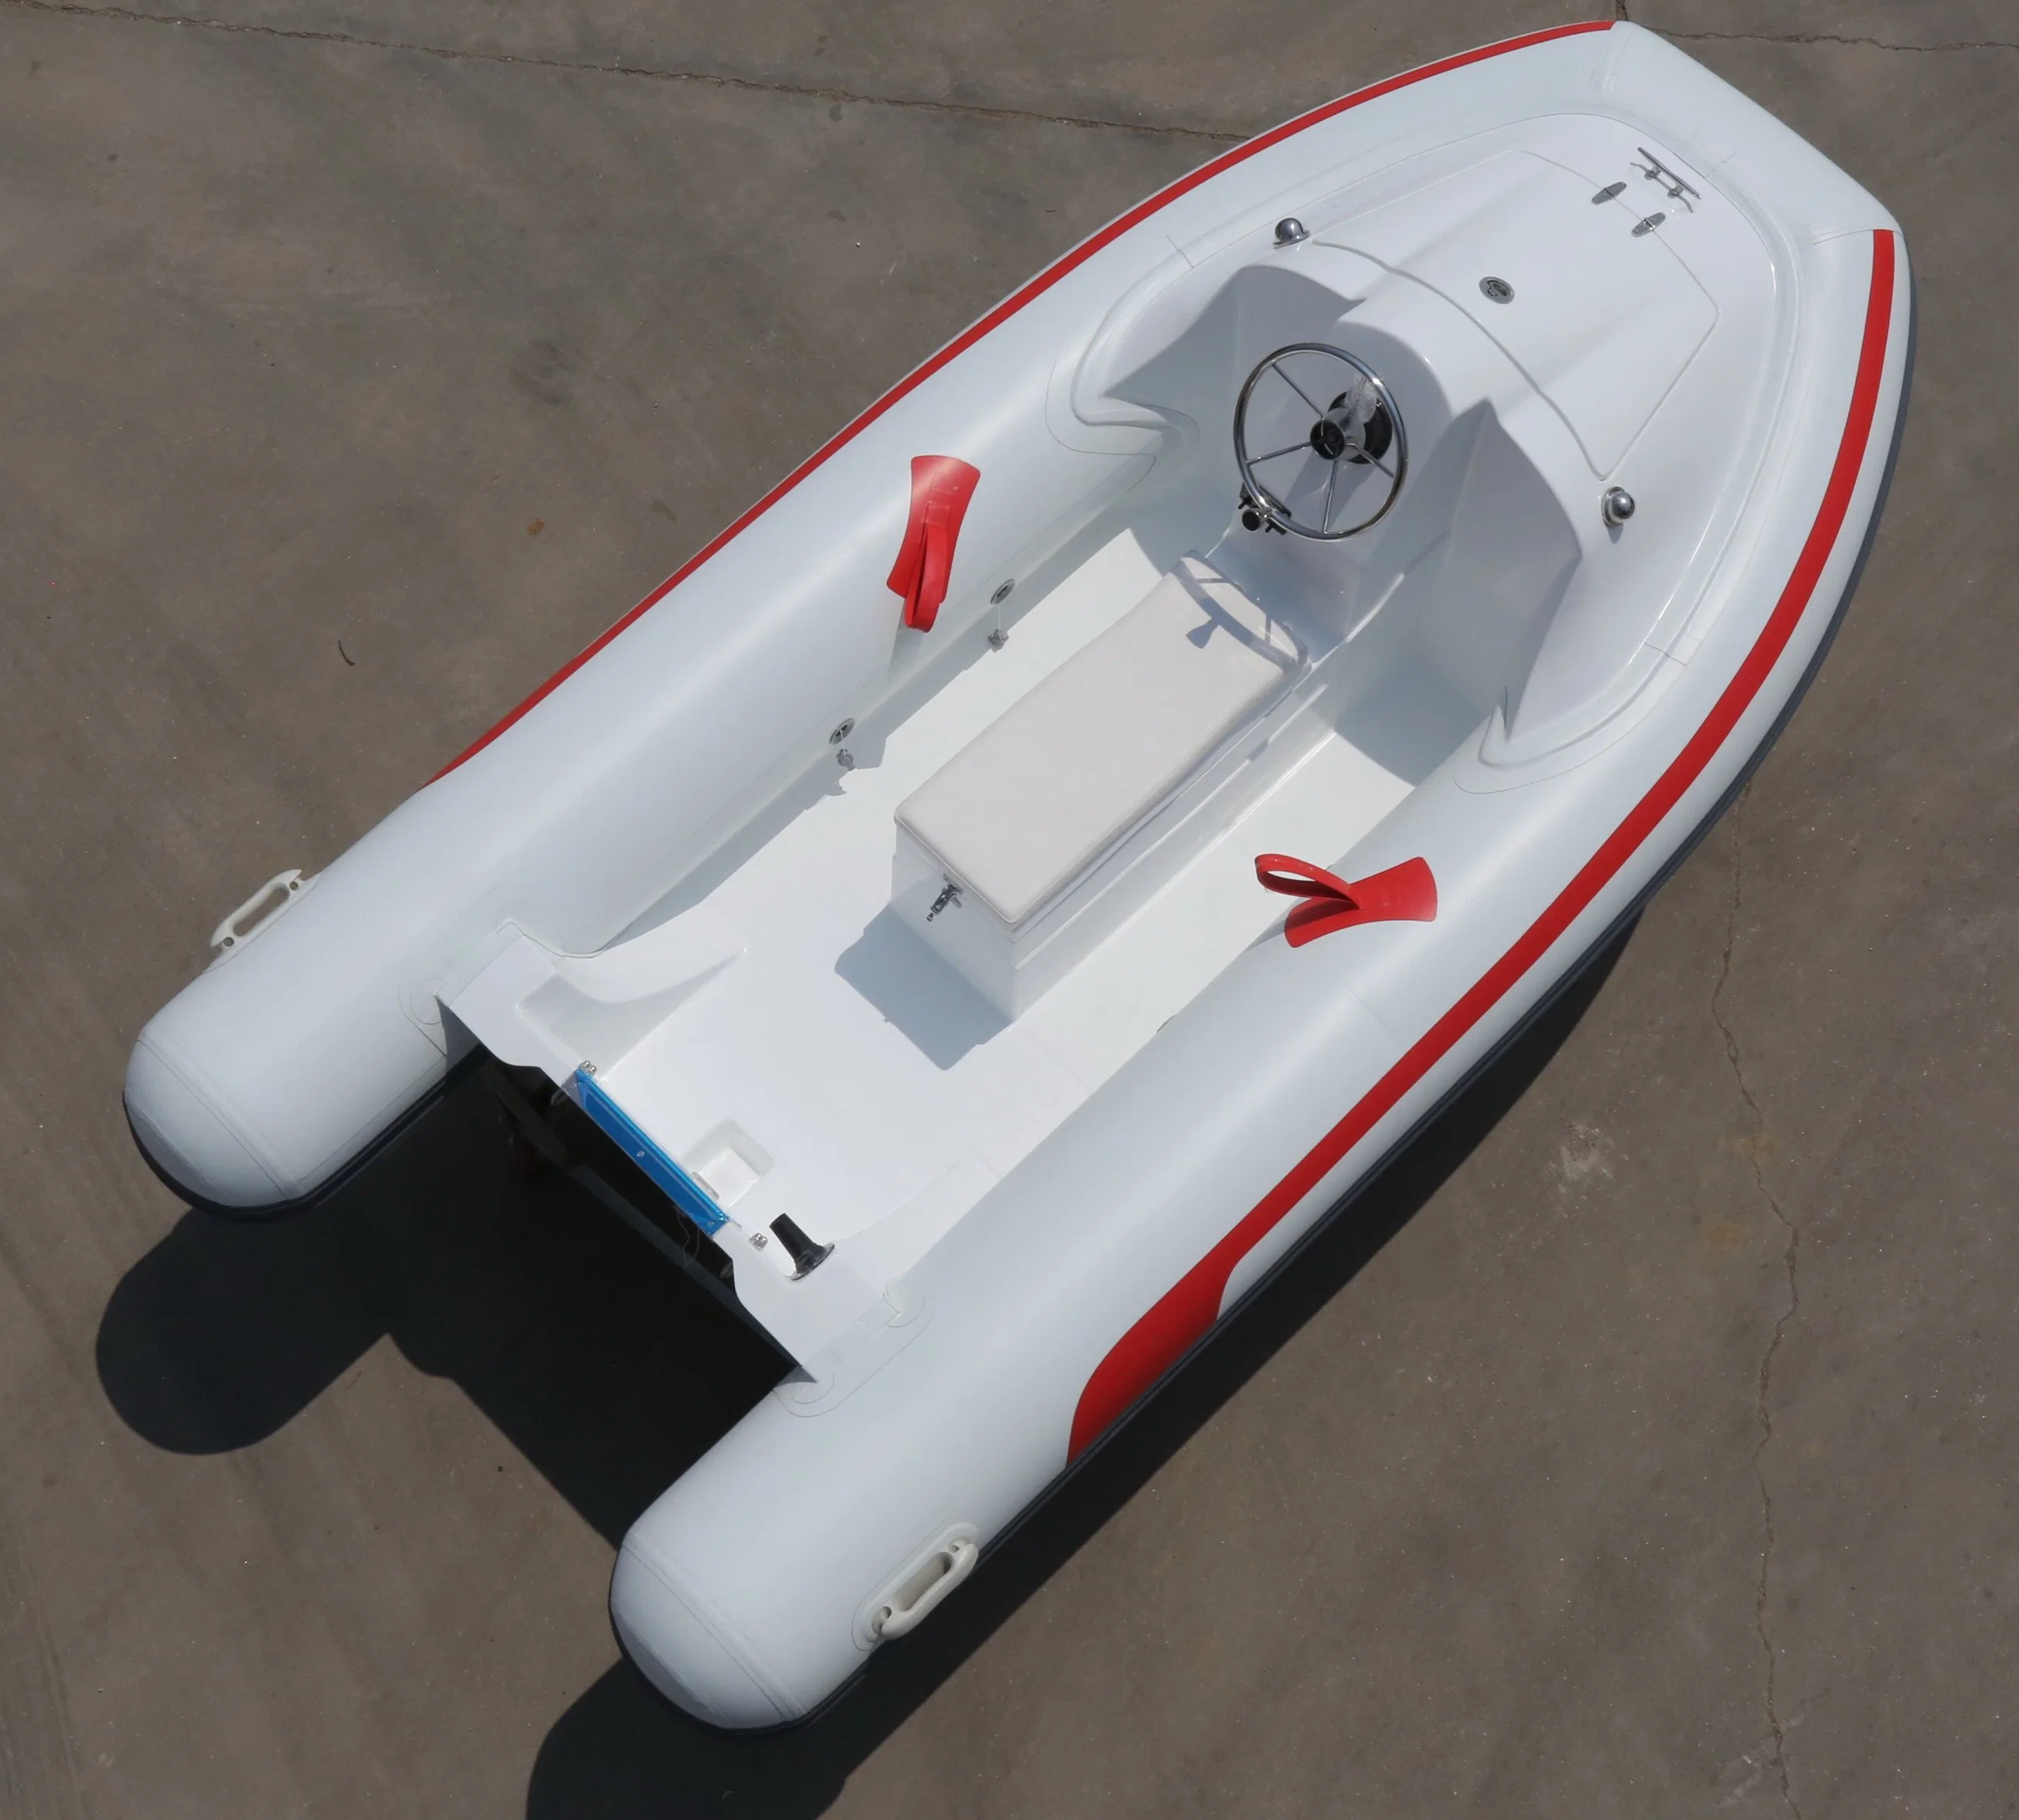 New Model French Orca Hypalon Material 3.6m Length Fiberglass Hull Rib Boats with CE Certificate